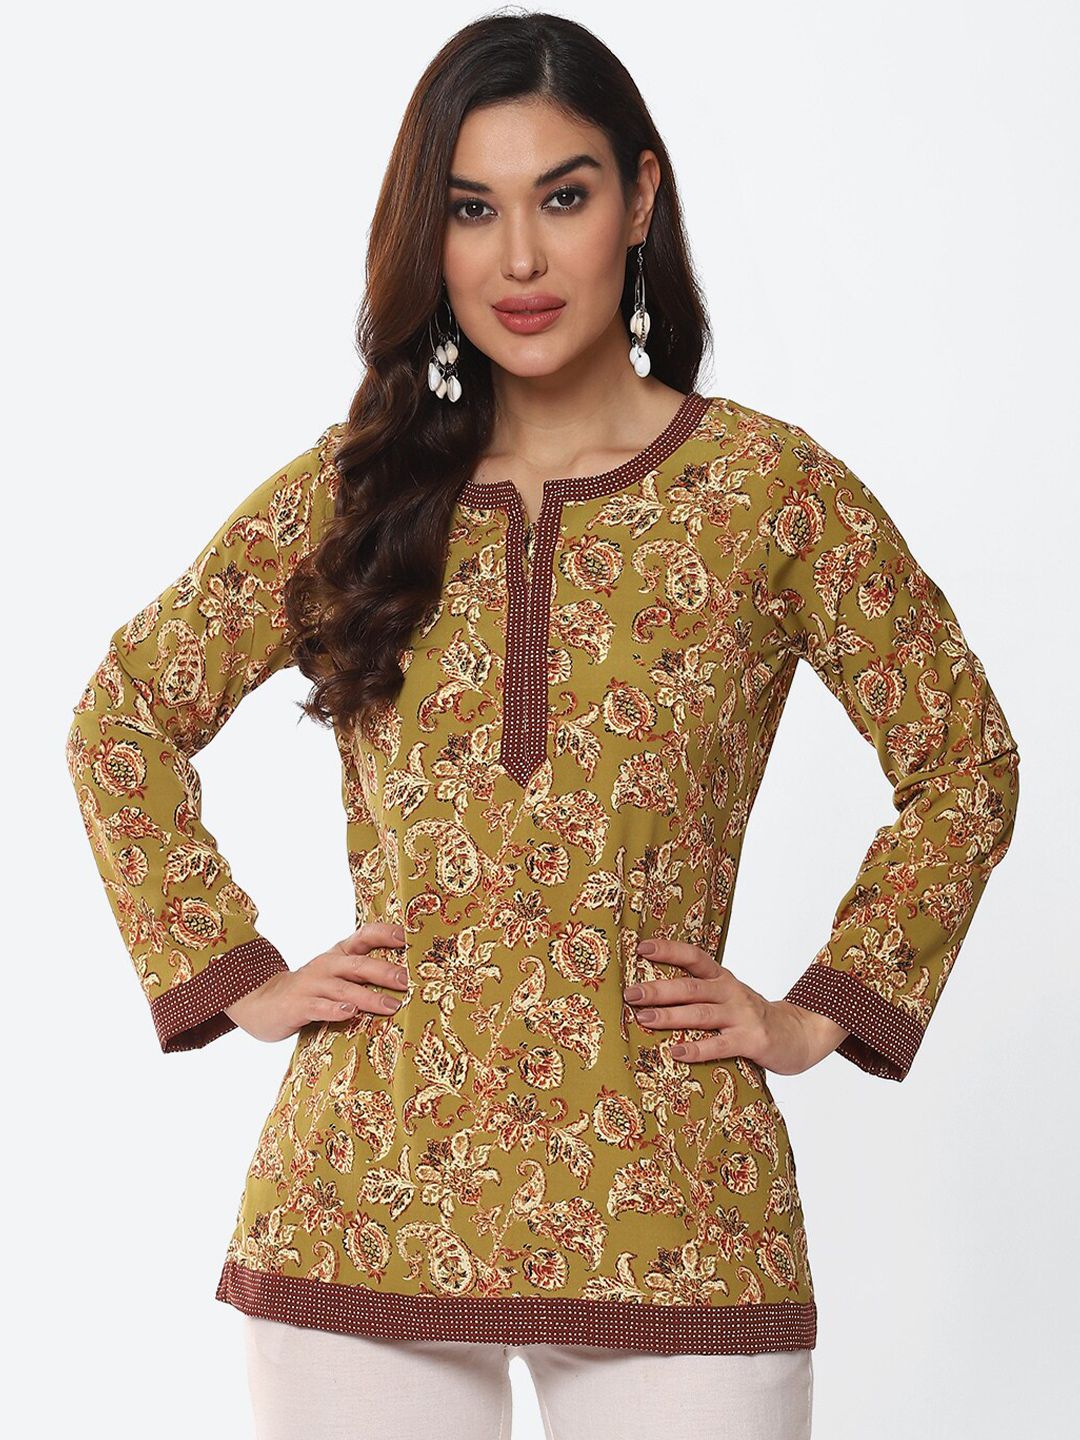 Biba Green Floral Printed Straight Fit Kurti Price in India